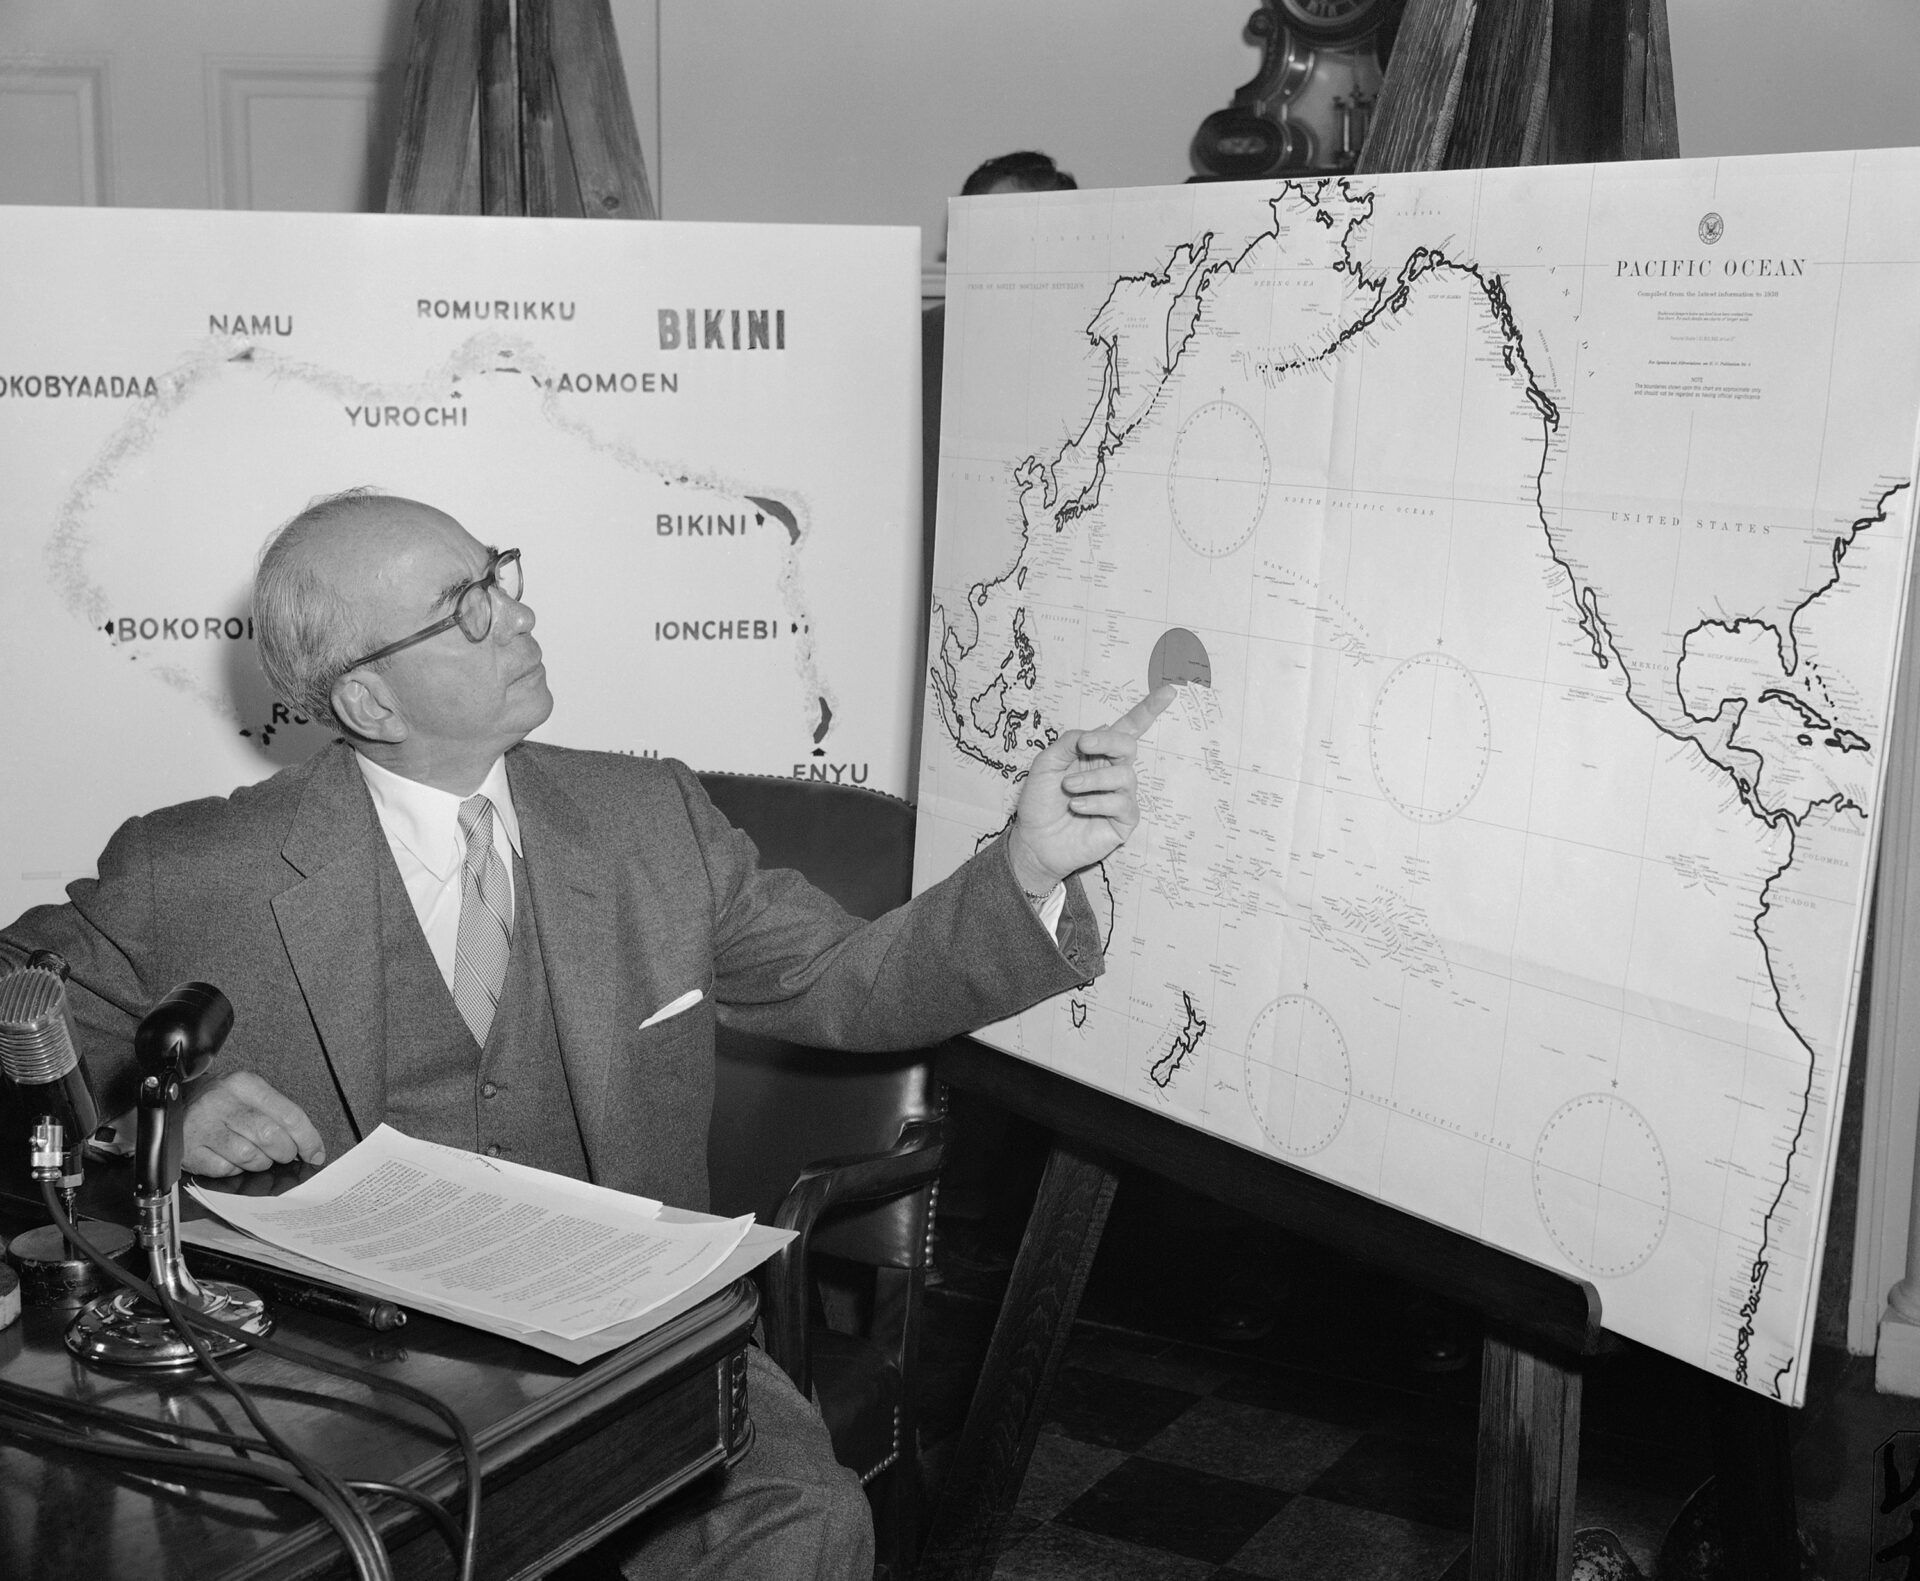 Lewis Strauss, then Chair of the Atomic Energy Commission, points to the spot in a chart of the Pacific where H-bomb tests were conducted in the Marshall Islands. Strauss gave newsmen information on the tests at President Dwight Eisenhower's news conference on March 31, 1954. (AP Photo/Byron Rollins)